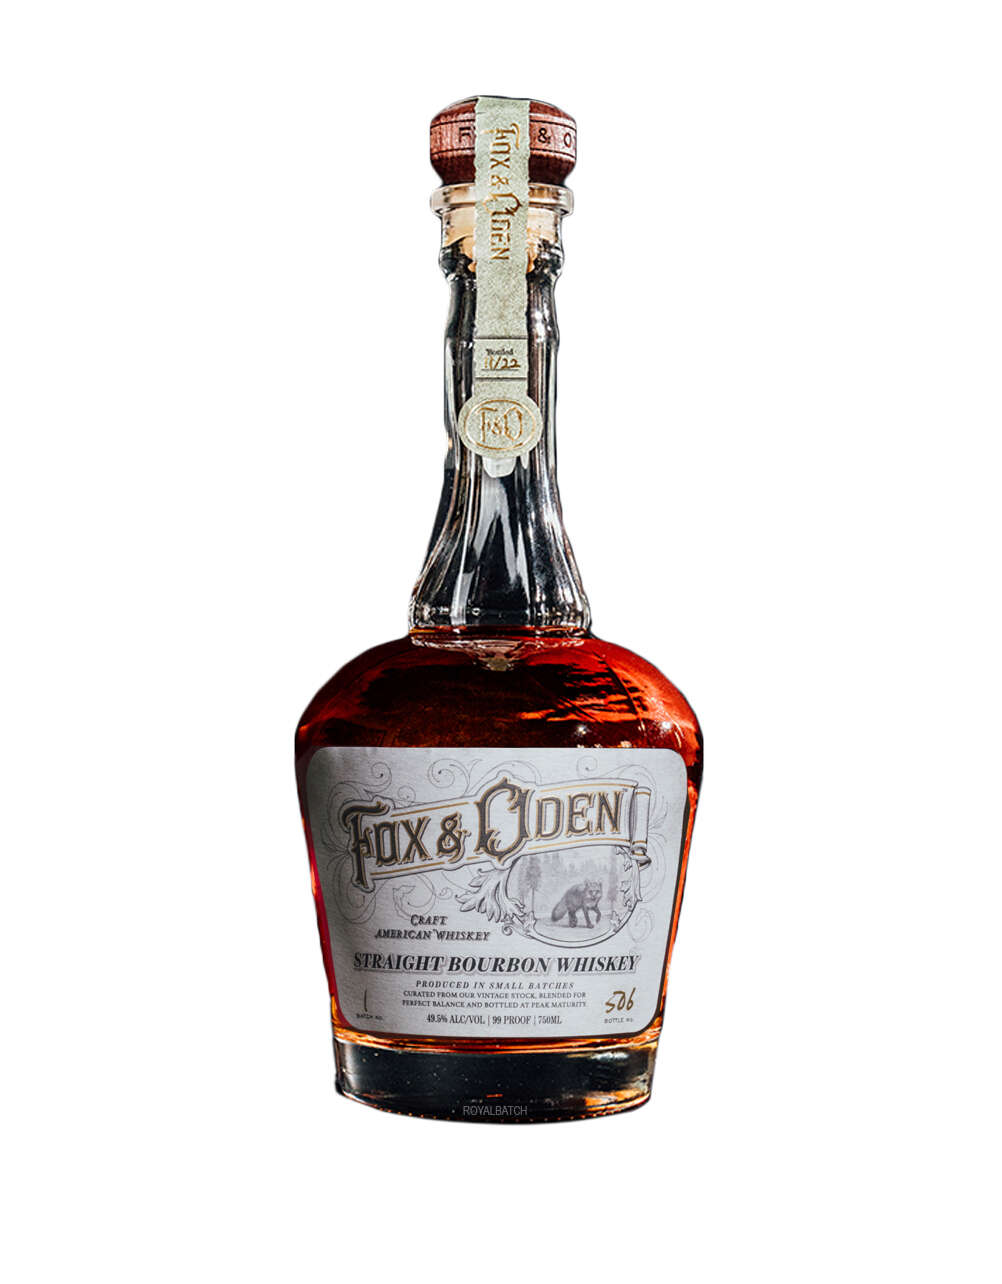 Fox and Oden Straight Bourbon Whiskey